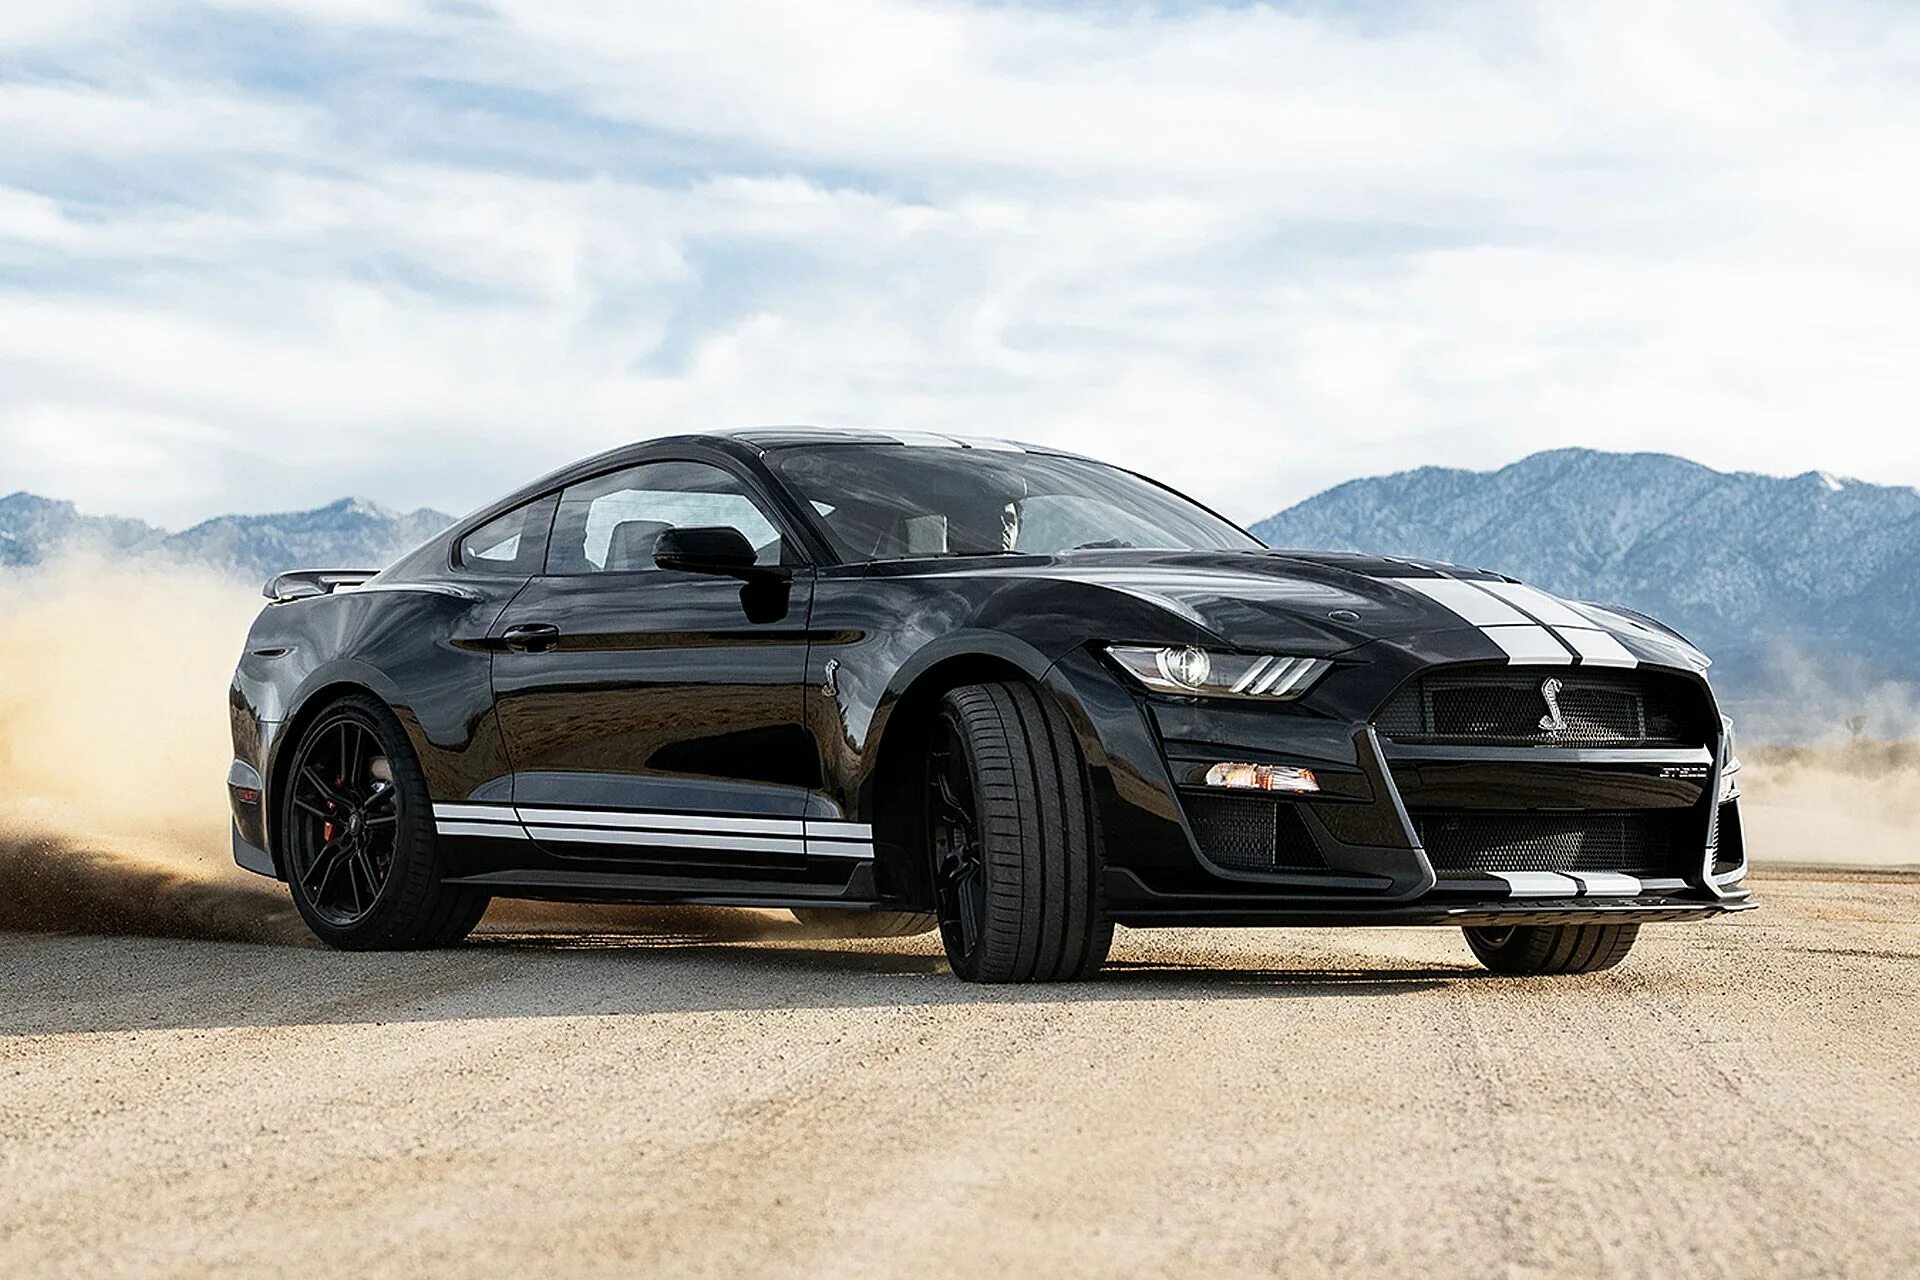 Mustang shelby gt. Форд Мустанг Shelby 2020. Форд Мустанг Шелби 2020. Форд Мустанг Шелби gt 500 2020. Ford Mustang Shelby gt500 2020.